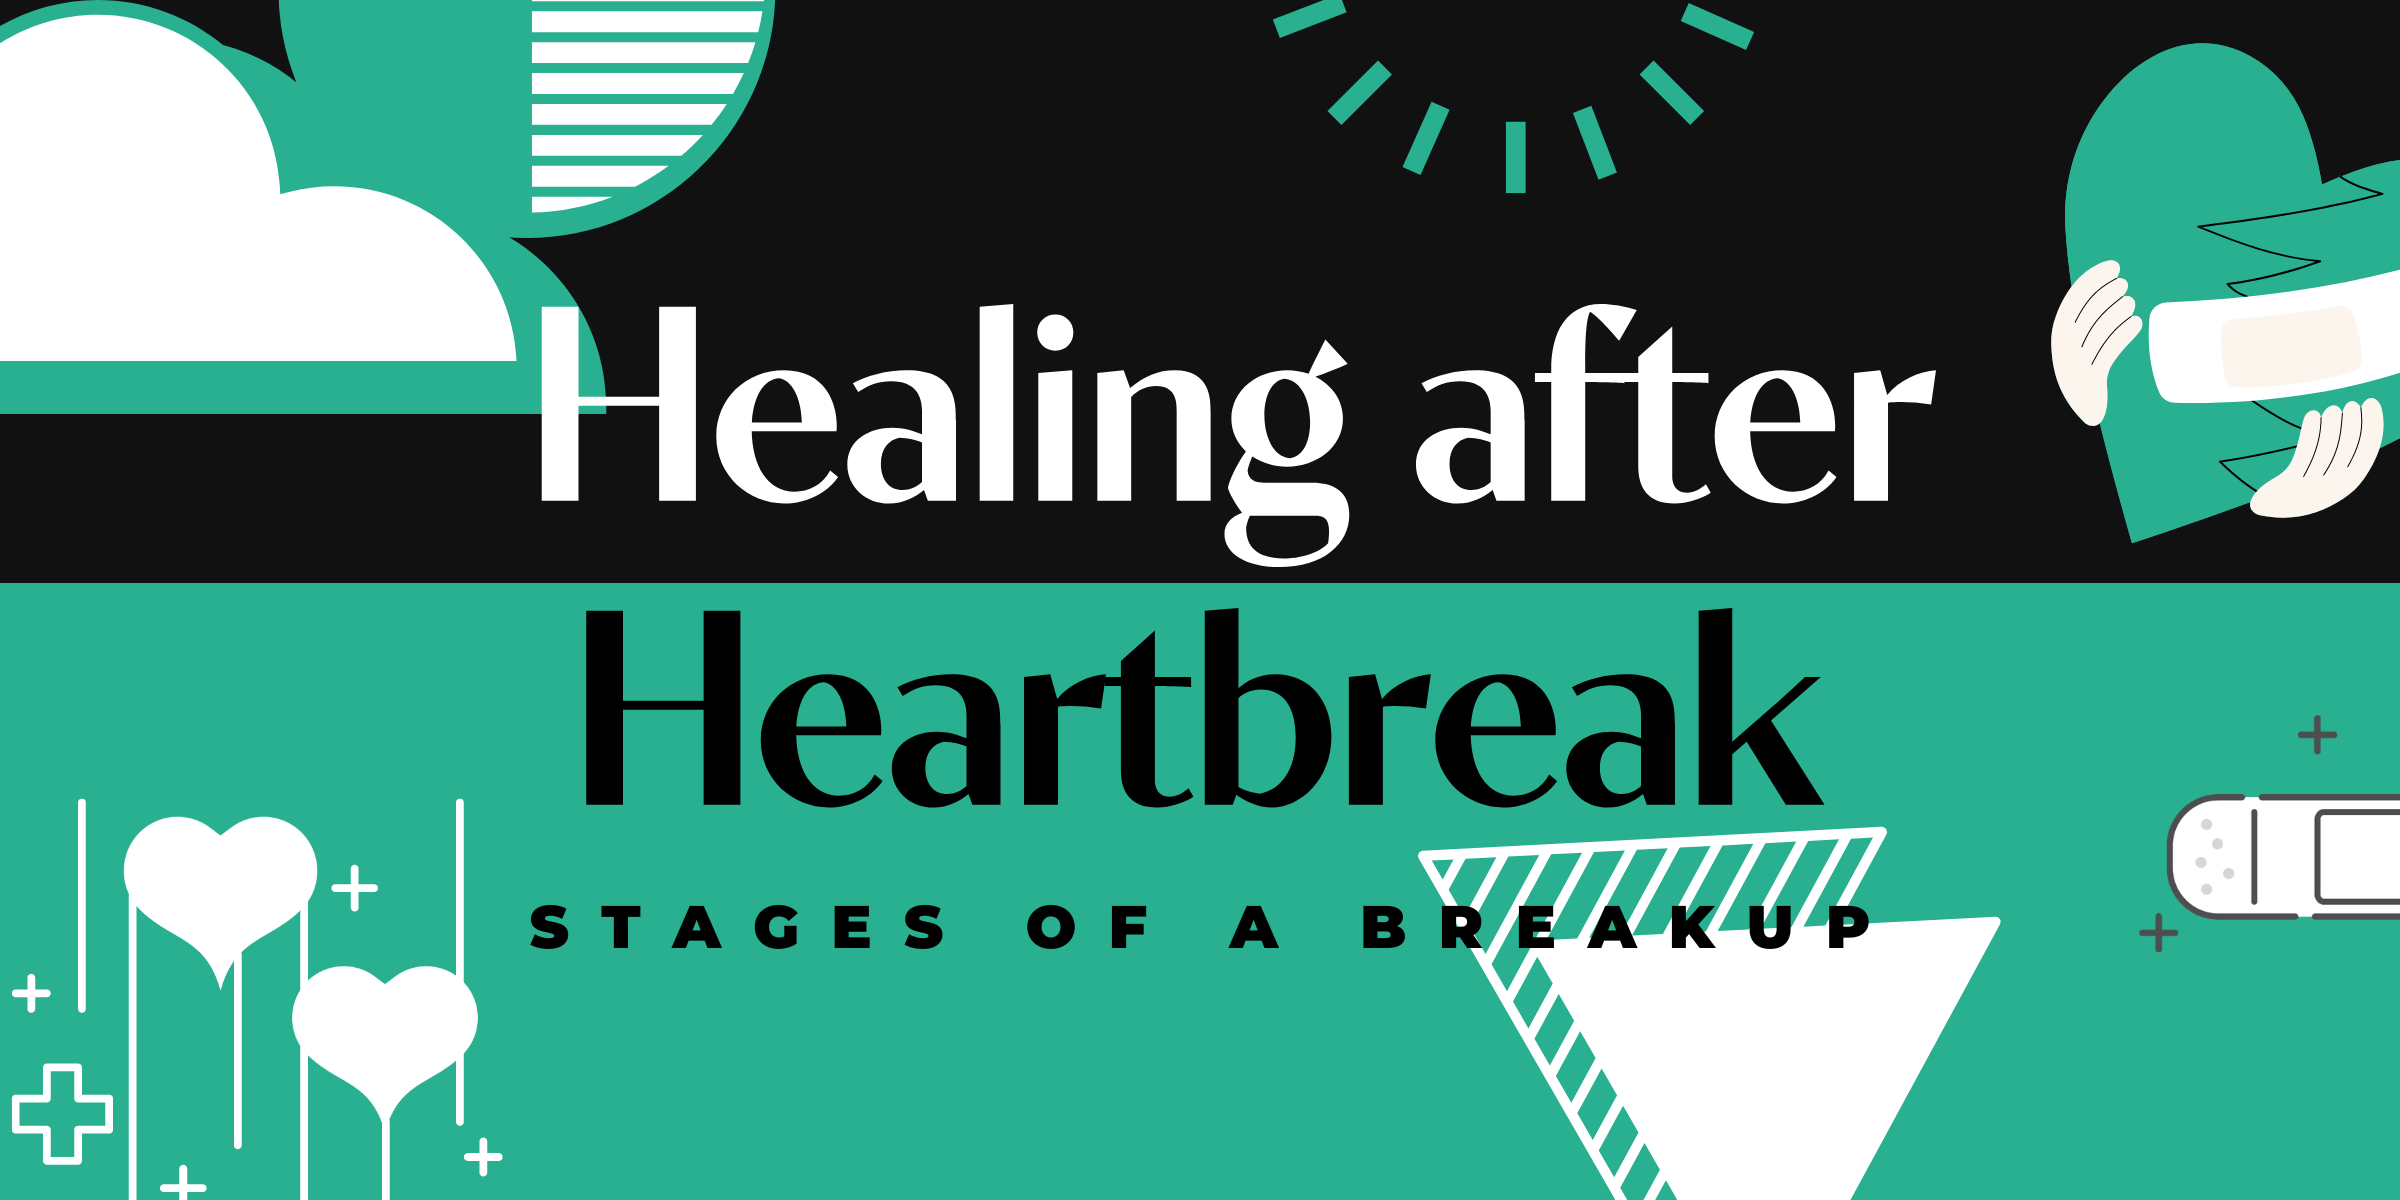 The path to healing after a heartbreak starts with recognizing the stages of a breakup and learning how to cope with each one. Read this empathetic guide on how to heal after a breakup.